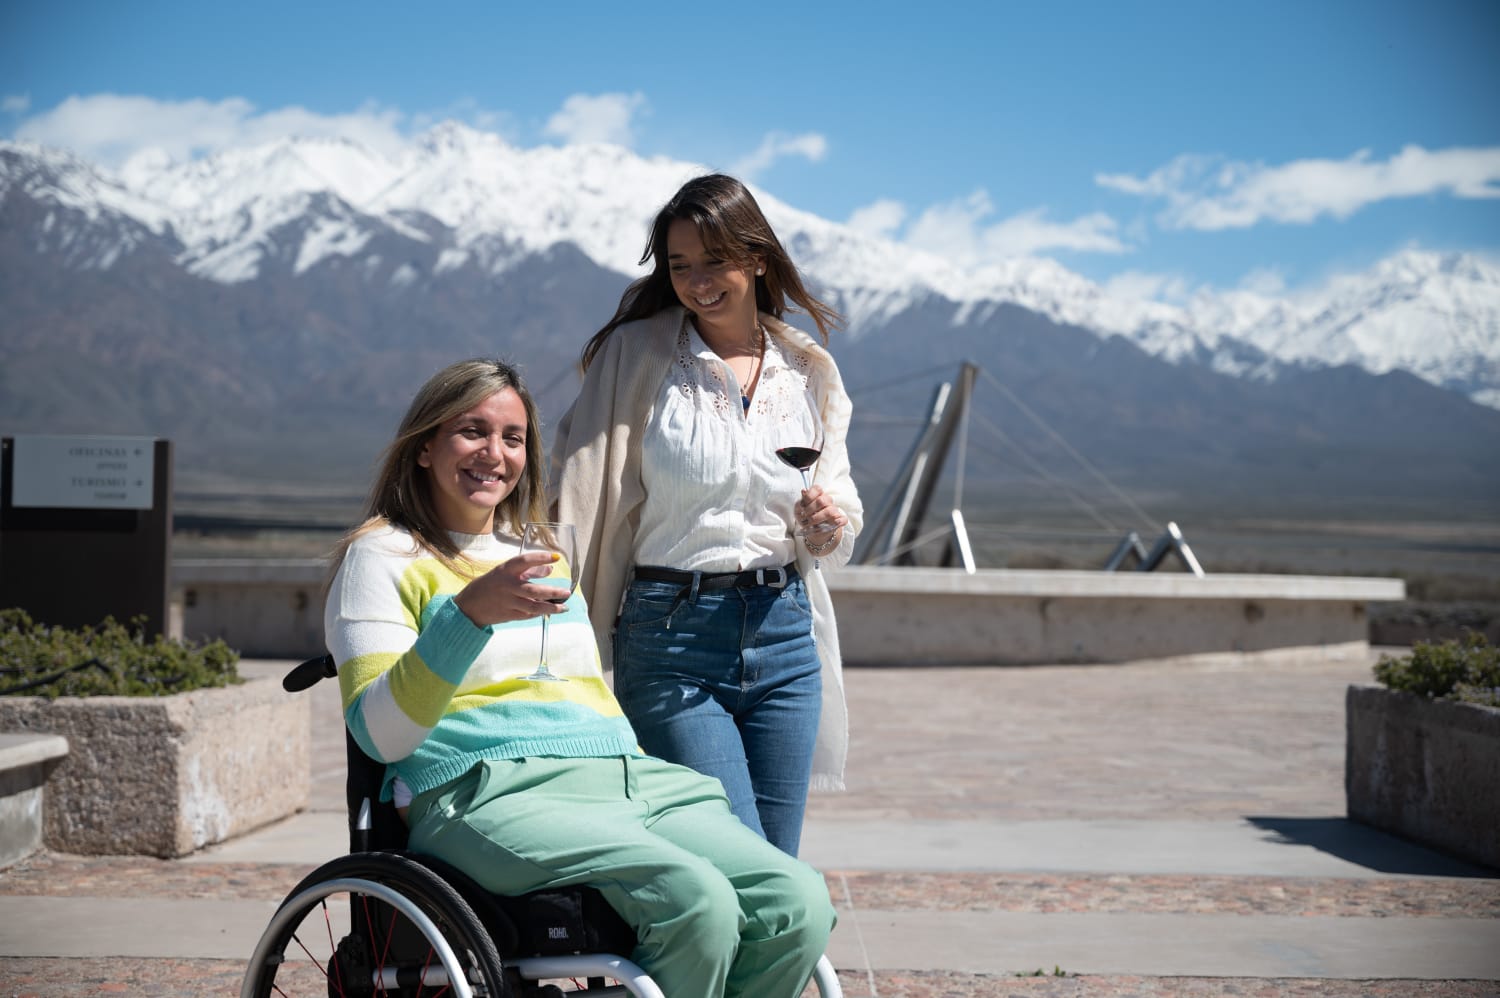 A 100% accessible wine tourism experience at the foot of the Andes